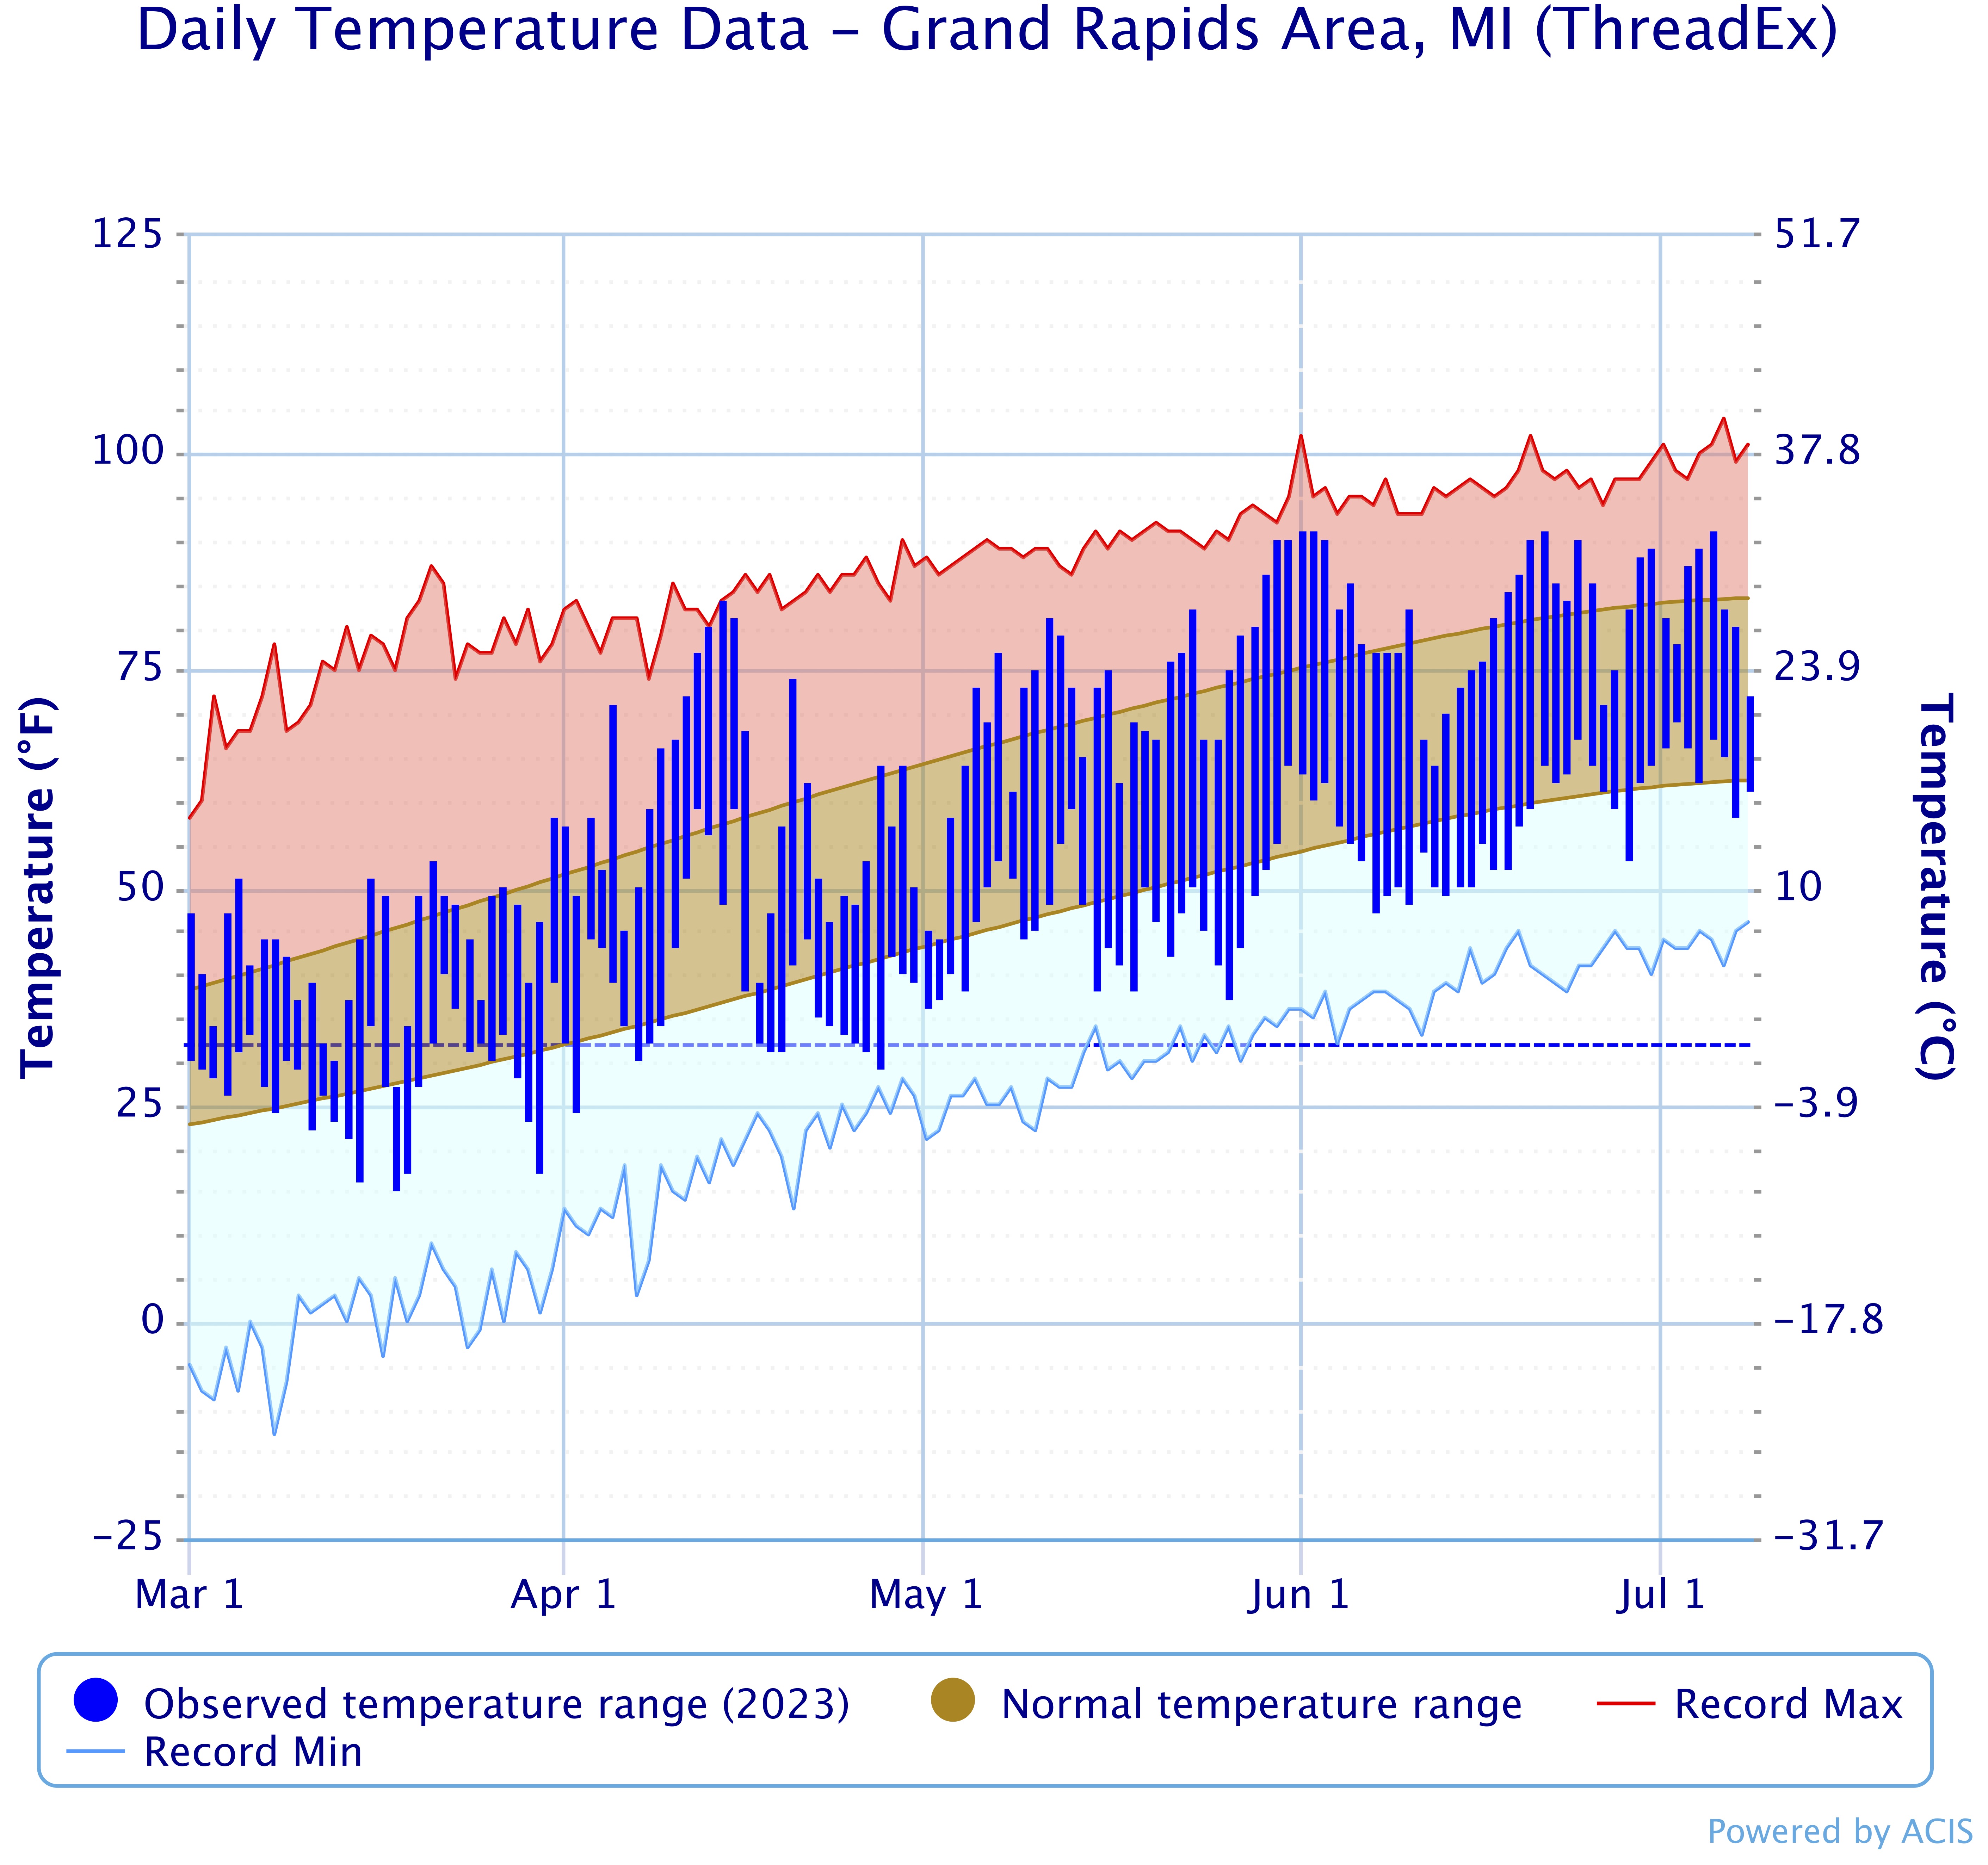 Daily temperature chart from March 1-July 8, 2023 with average low and high temperatures.